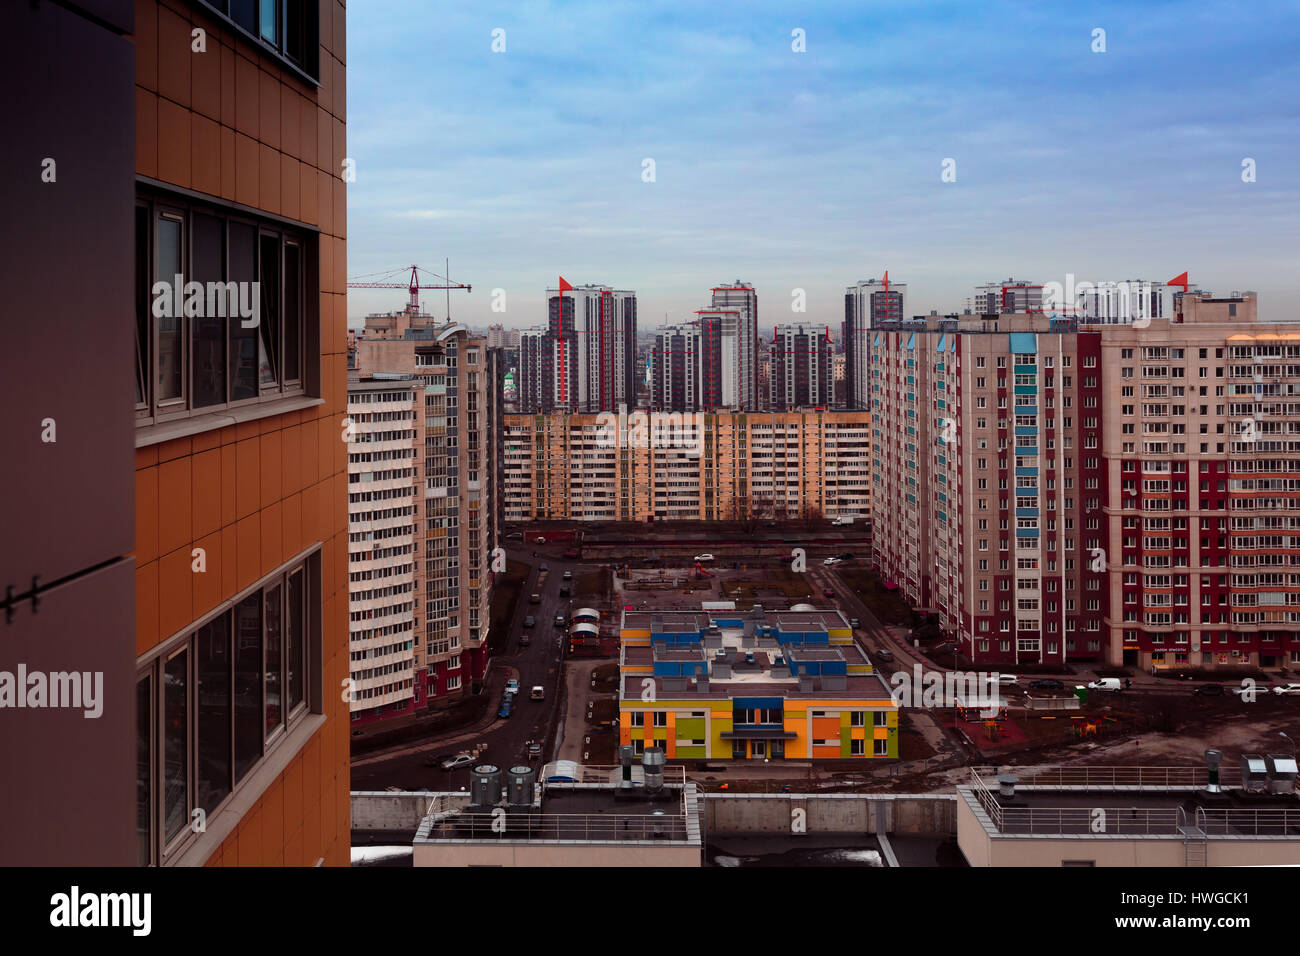 Multi storey houses of the big city in the daytime. Stock Photo